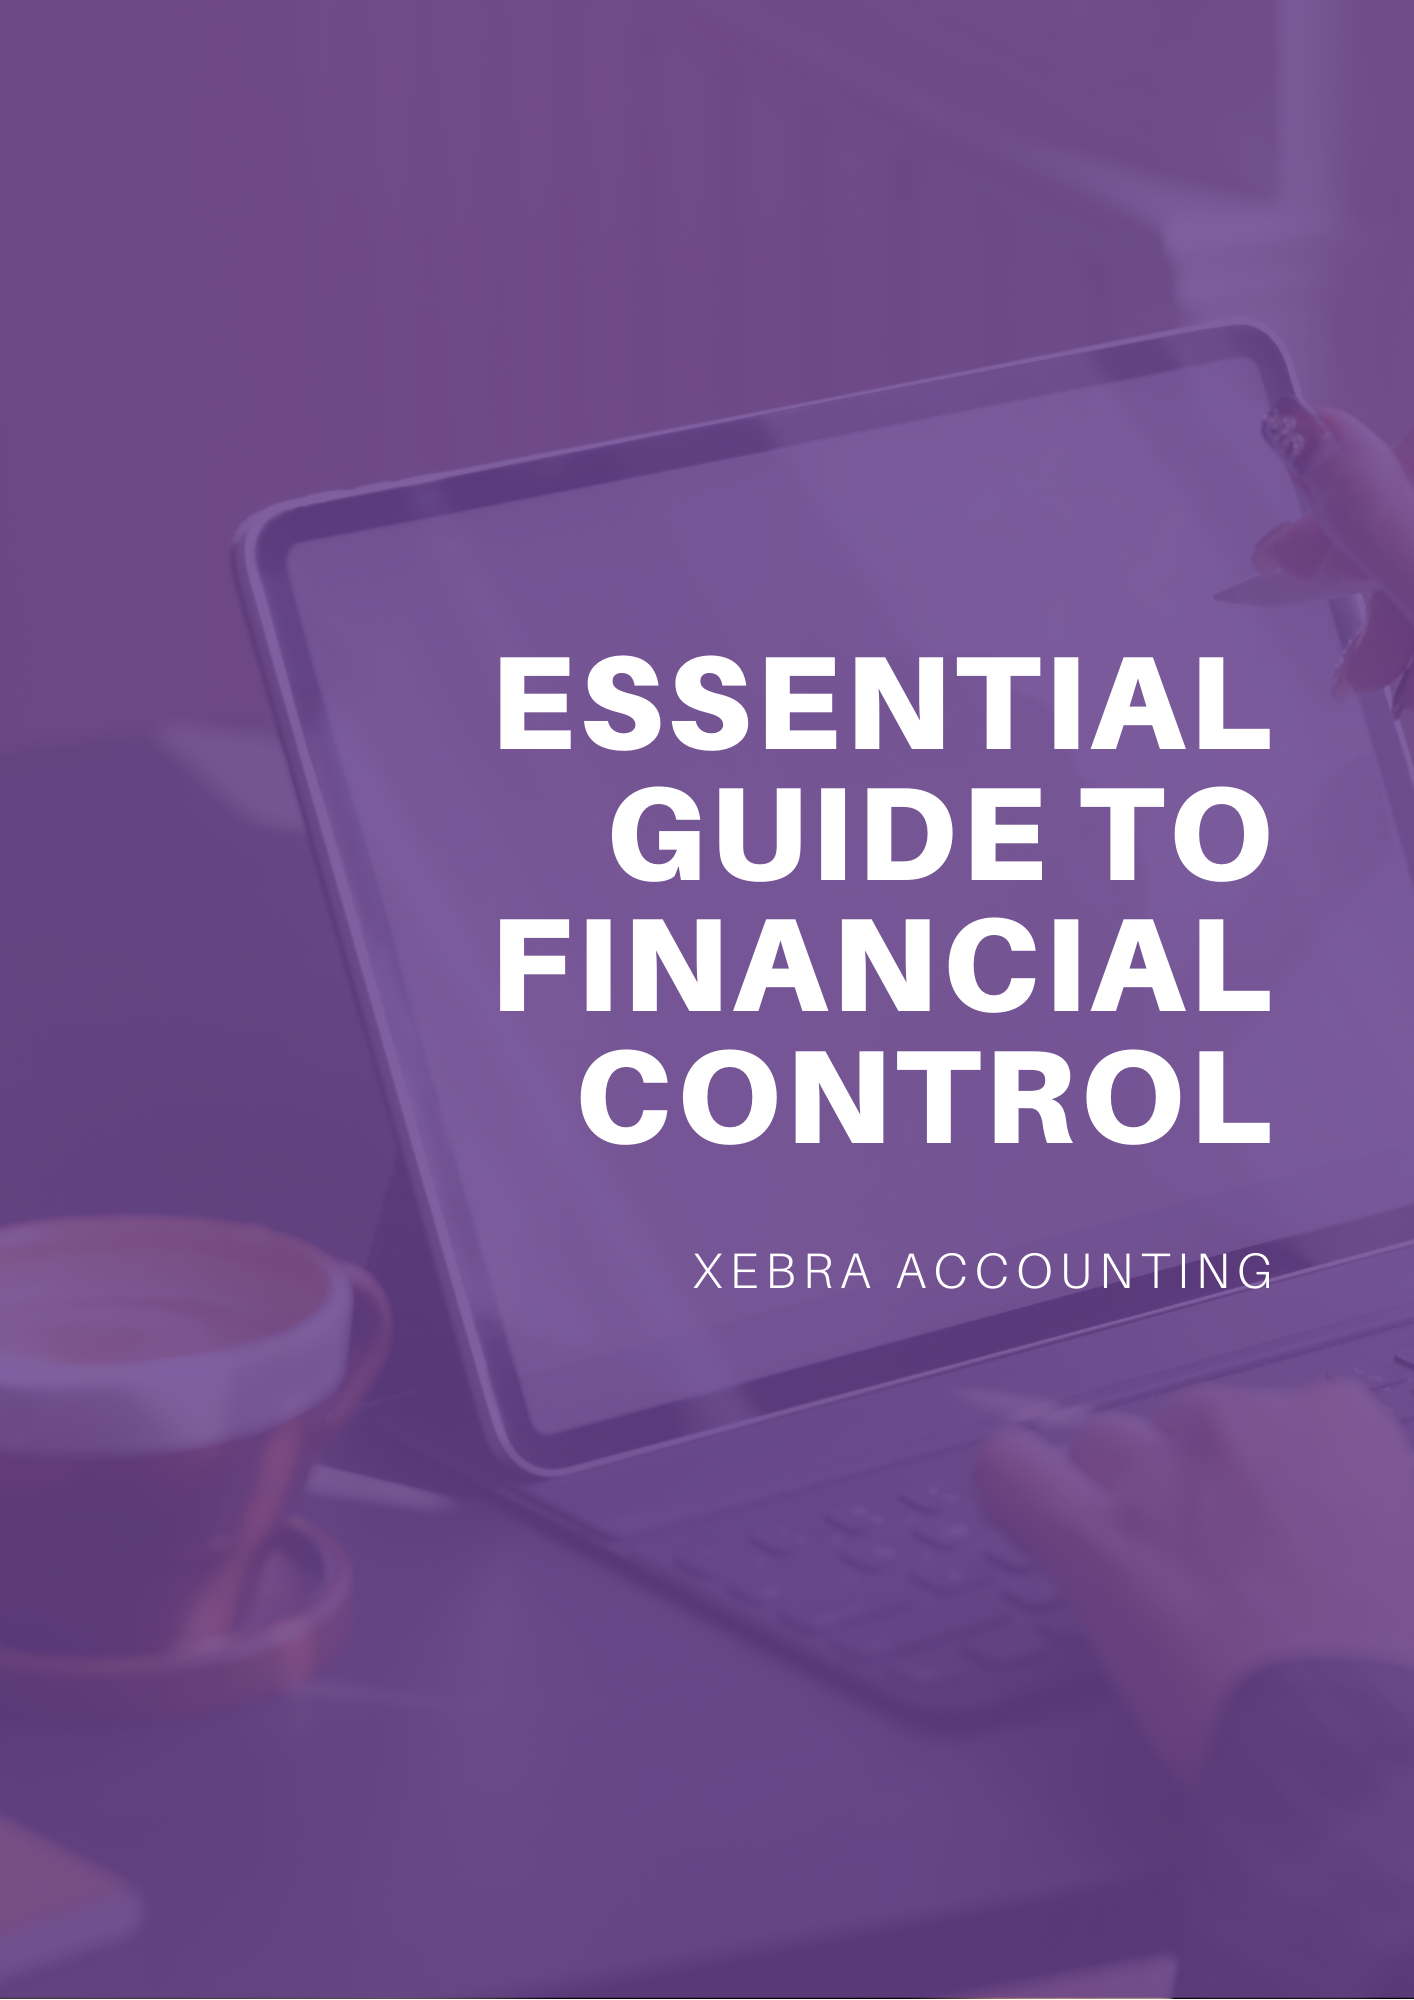 The Essential Guide to Financial Control